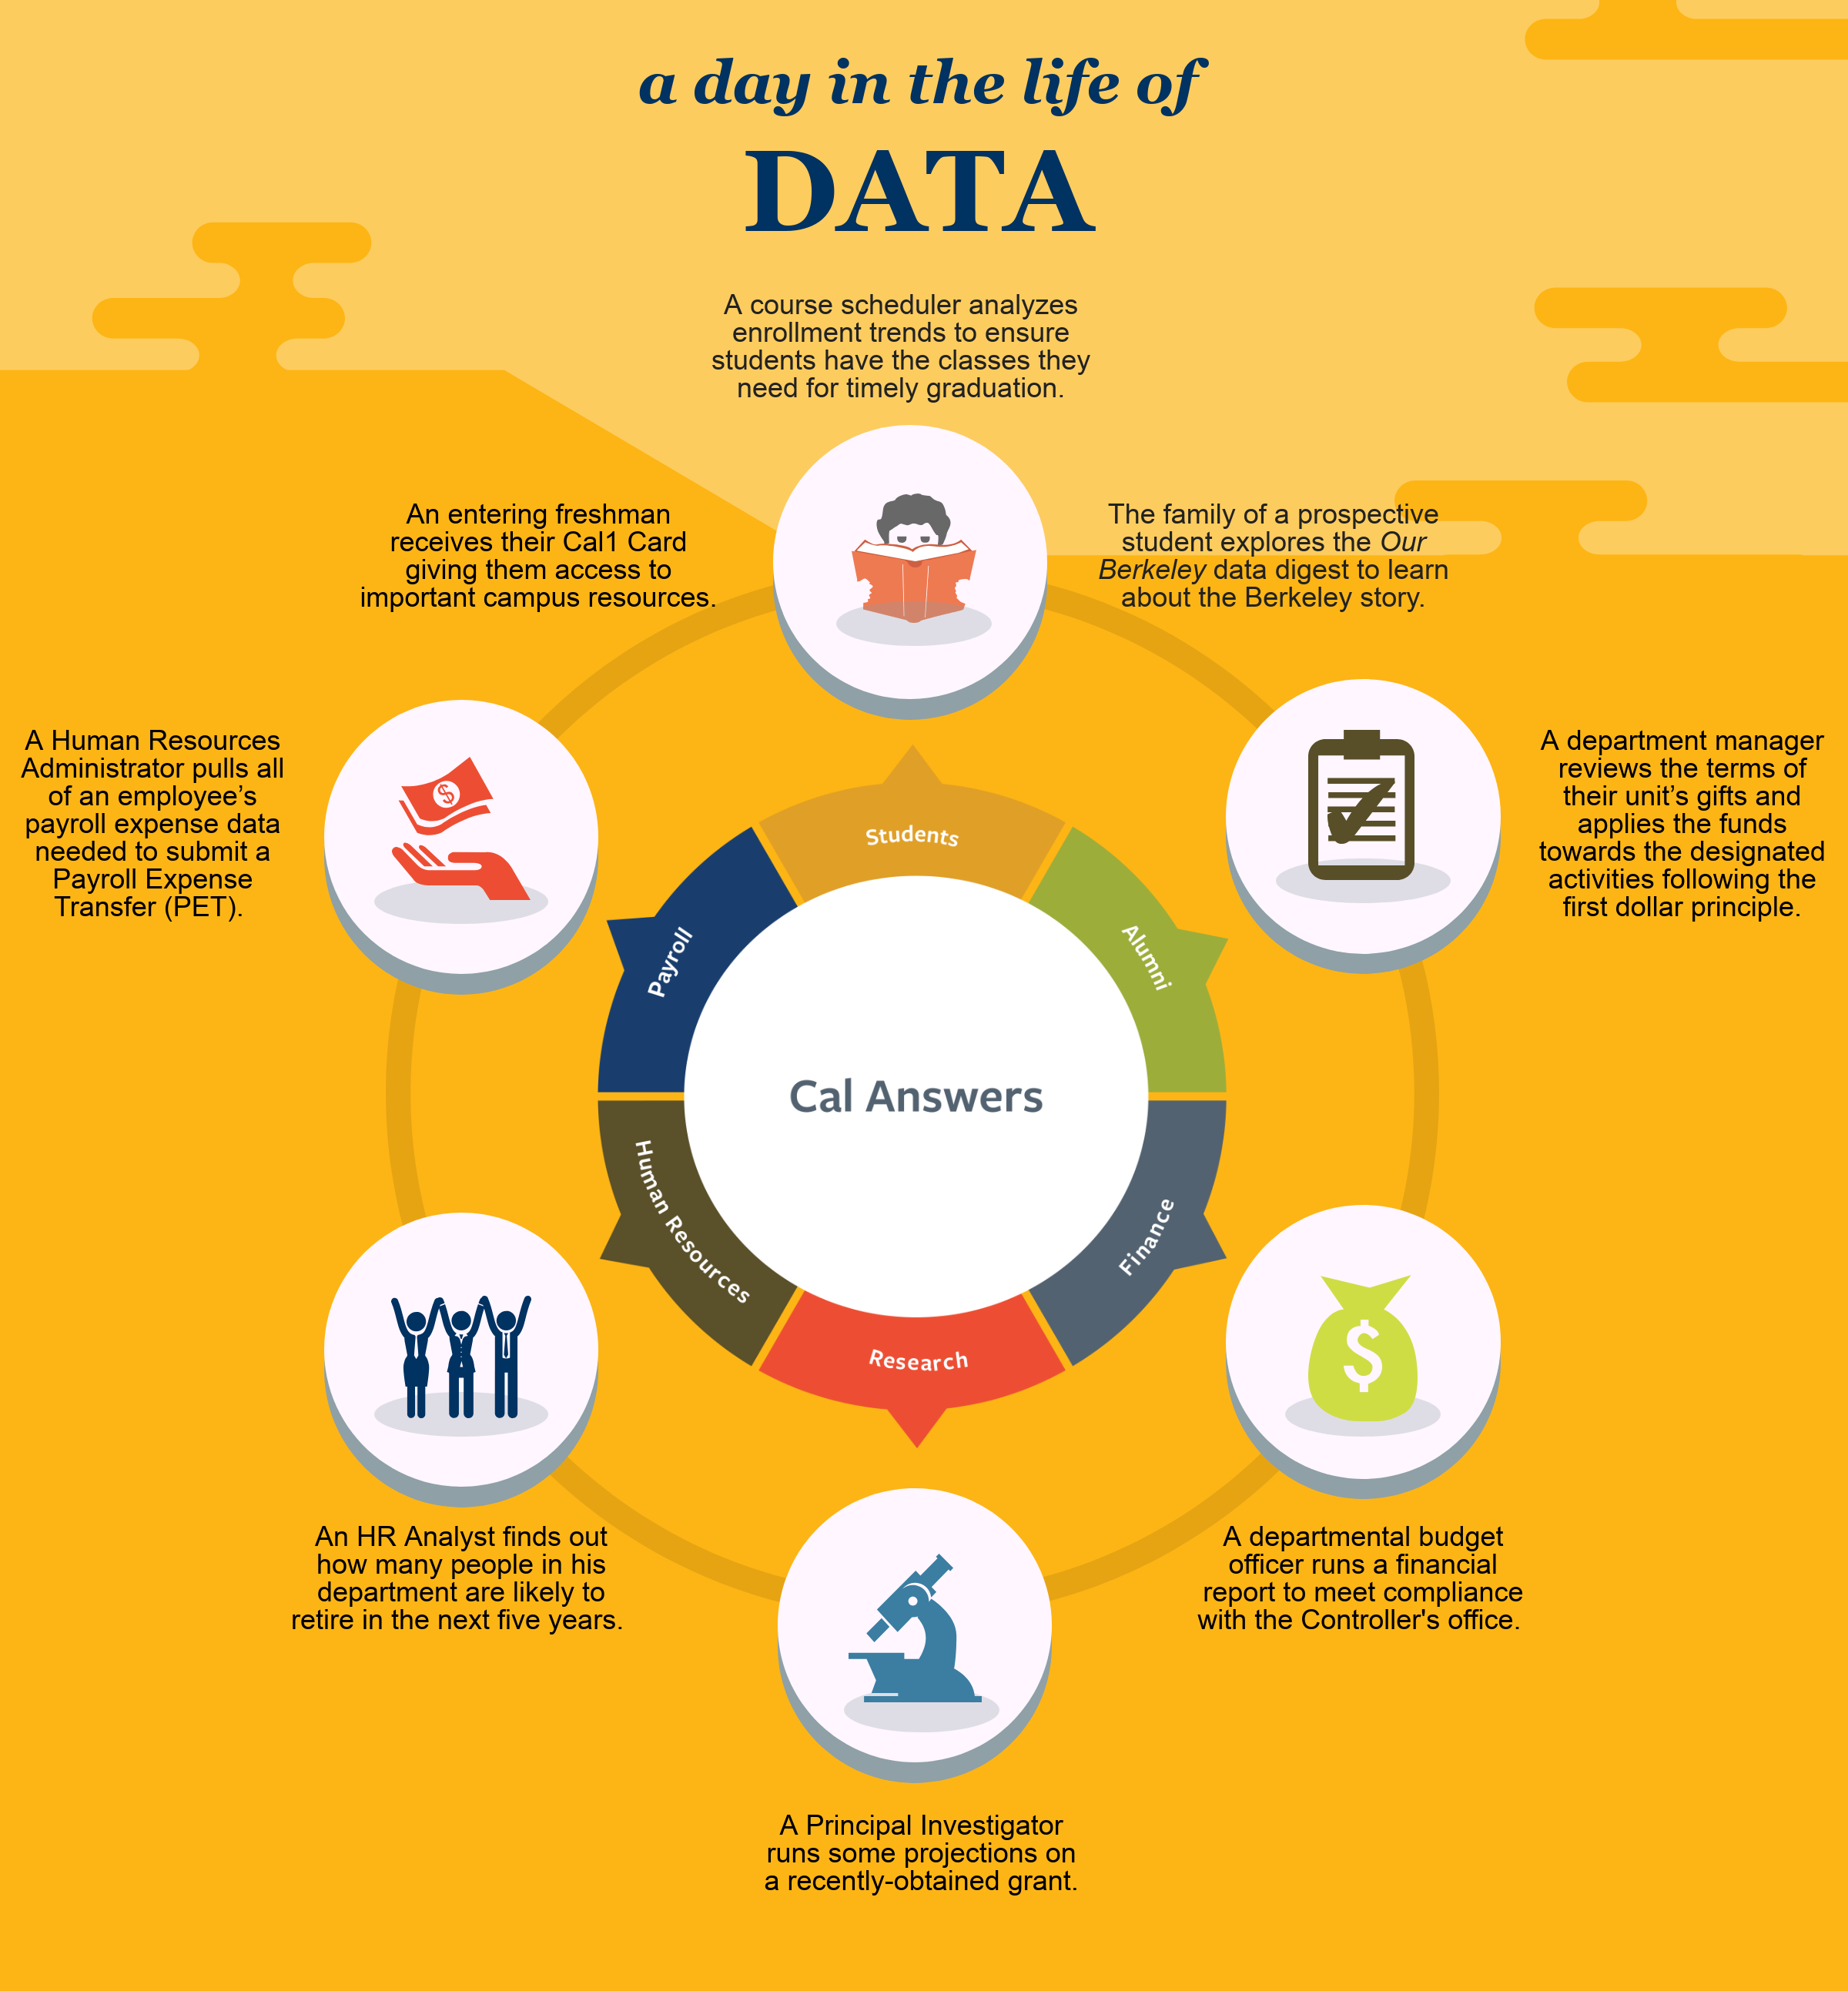 day in the life of data infographic